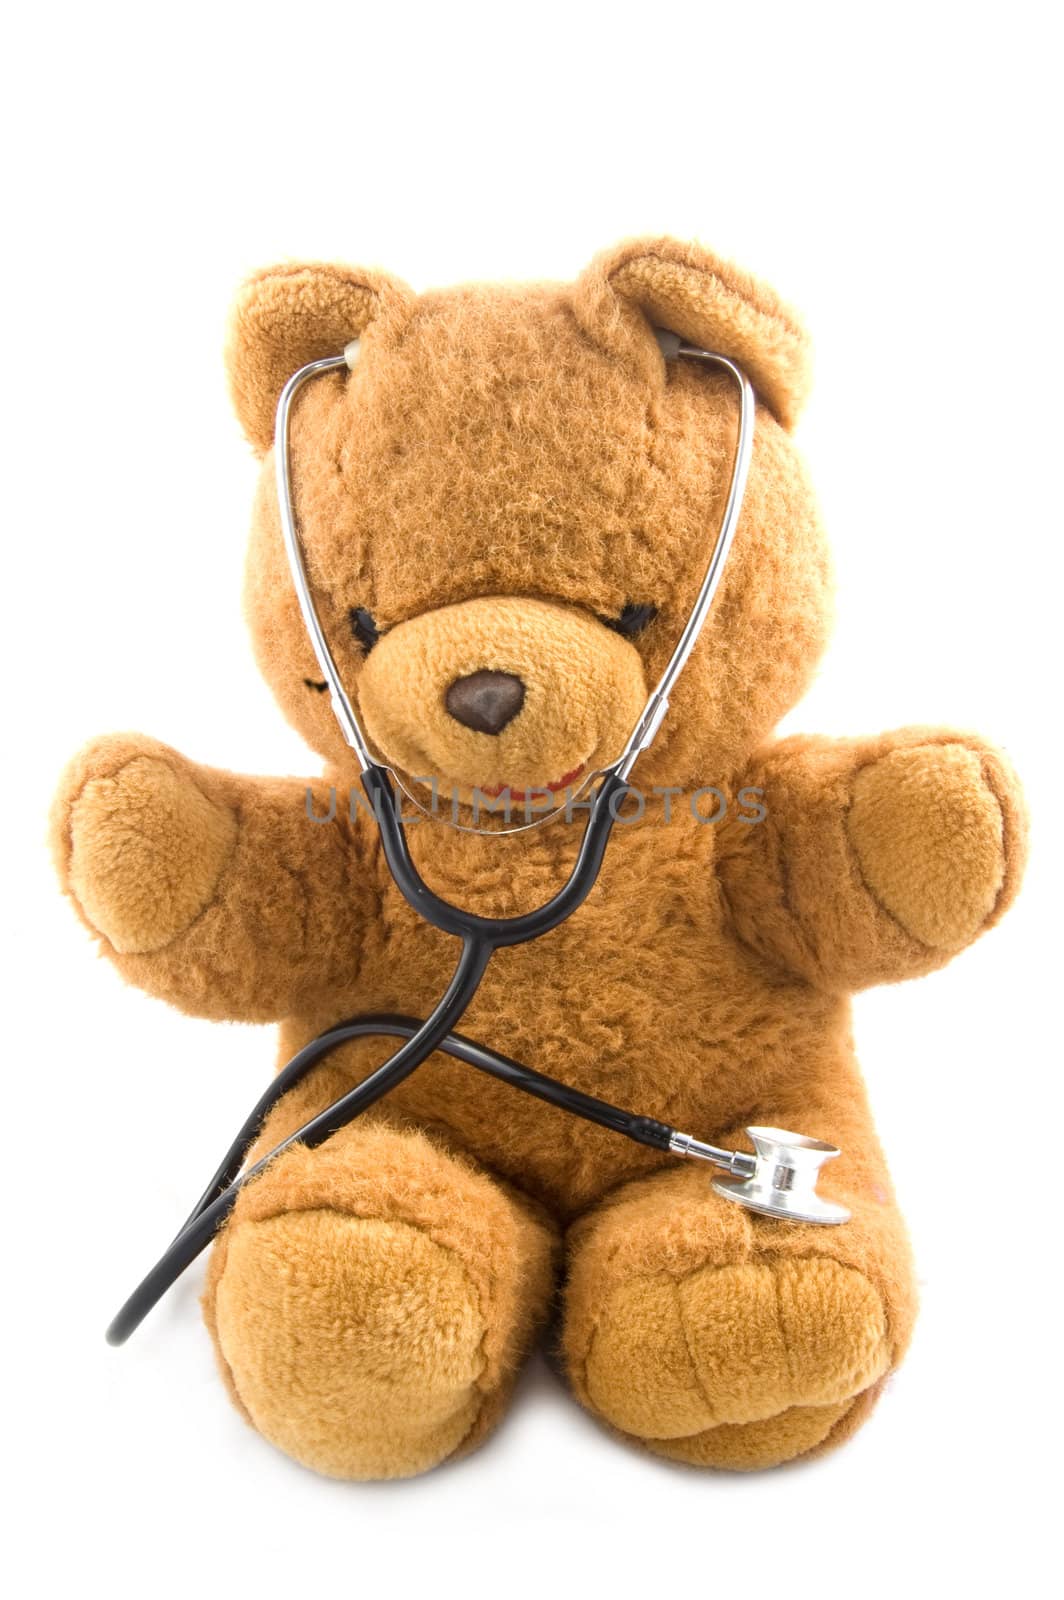 Bown teddybear acting as a doctor with a stetoscope by ladyminnie